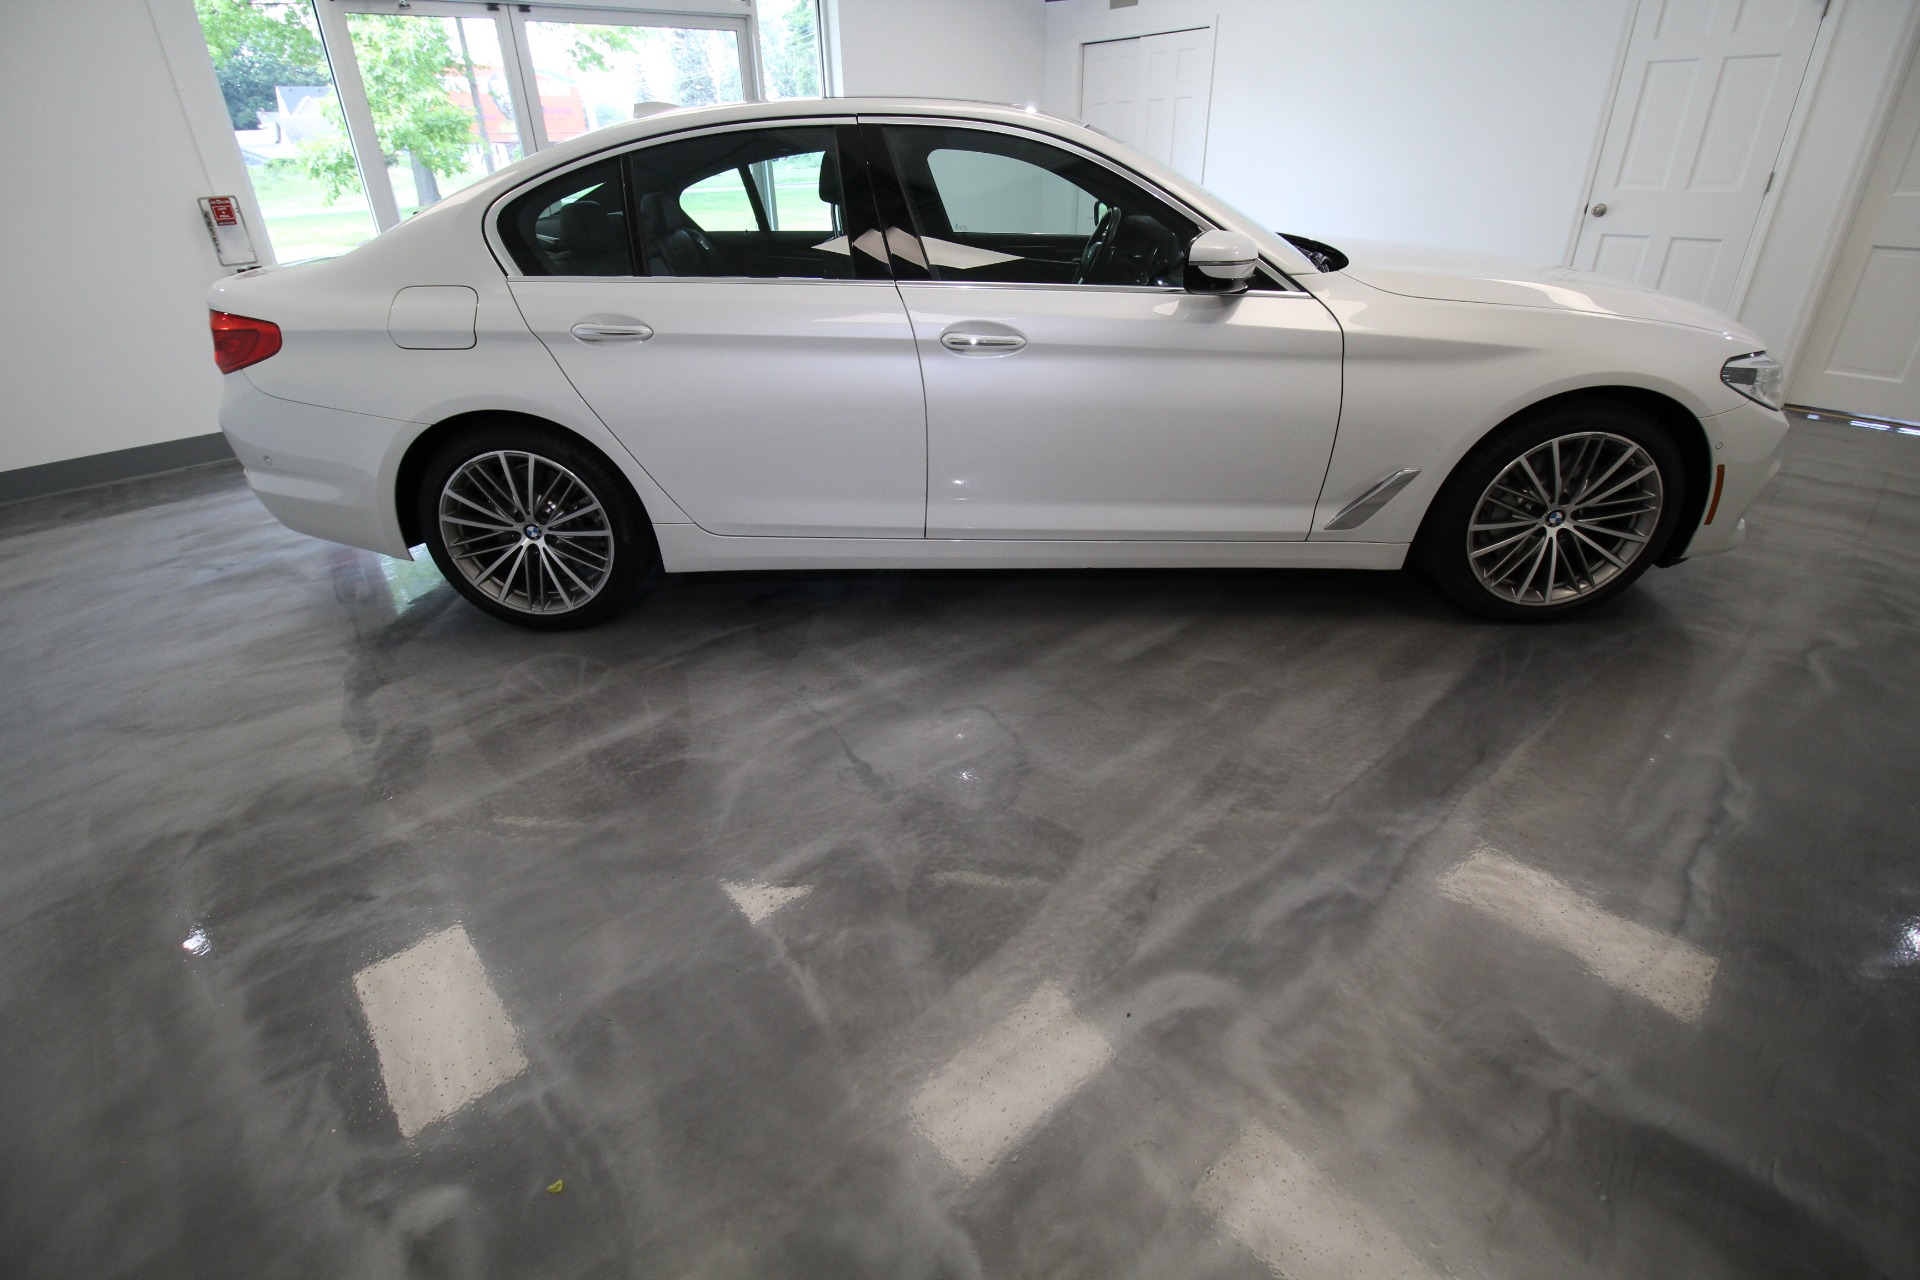 Used 2017 BMW 5-Series 540i xDrive LOADED WITH OPTIONS LOW MILES HARD TO FIND COLORS | Albany, NY